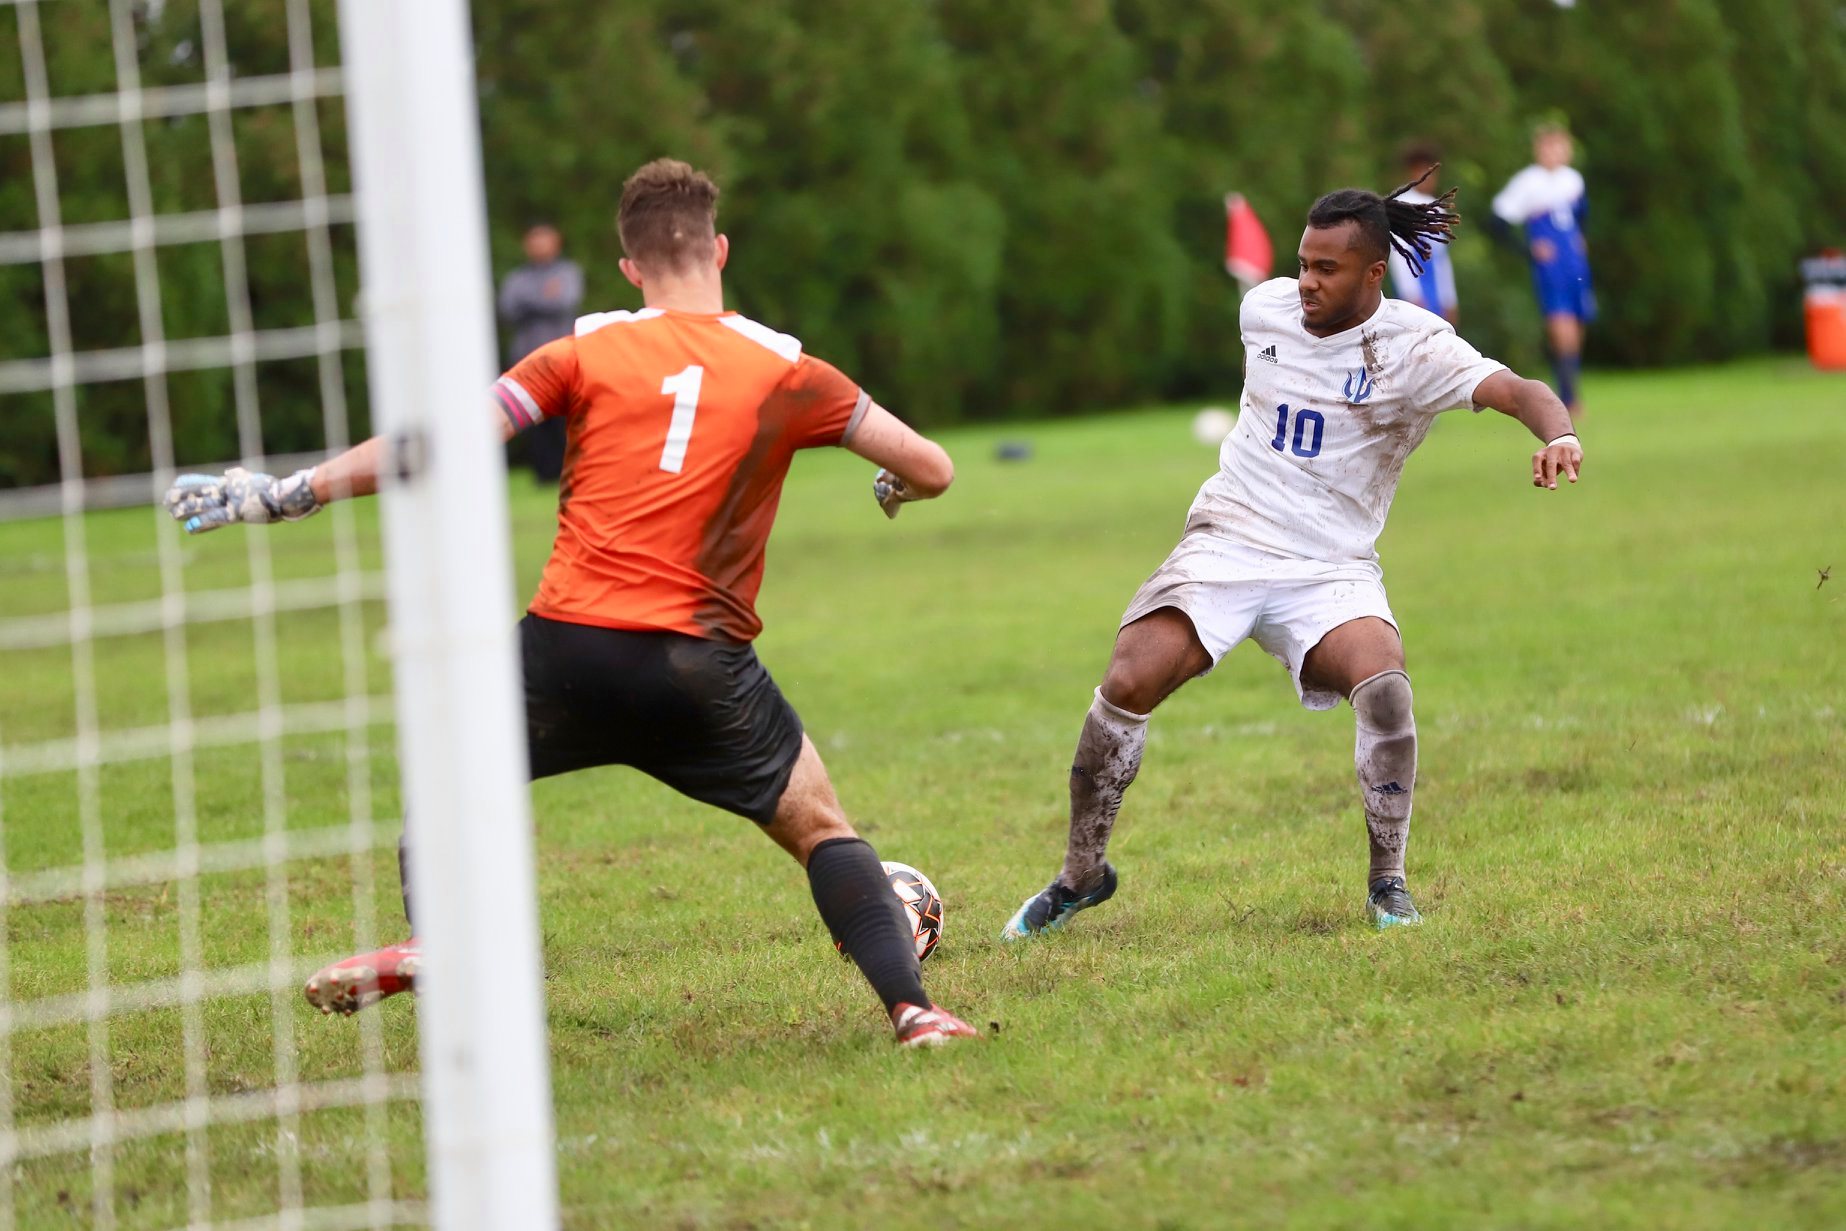 Koffi scores game-winner for Tritons